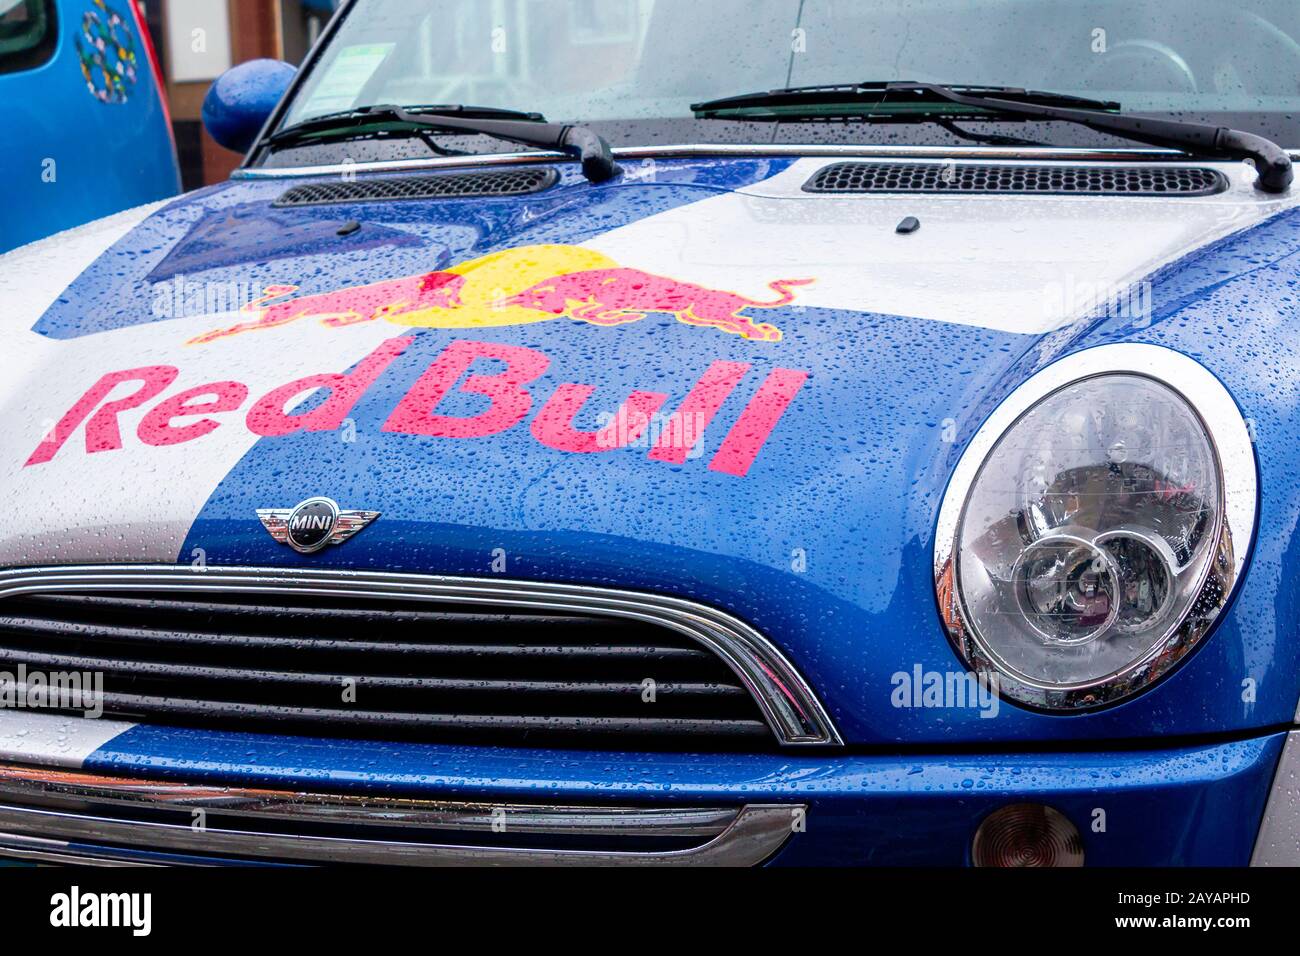 Uzhhorod, ukraine - 14 JUL, 2013: Red Bull mini cooper publicity car detail. fancy car tuning used for promotion. wet advertisement vehicle after the Stock Photo